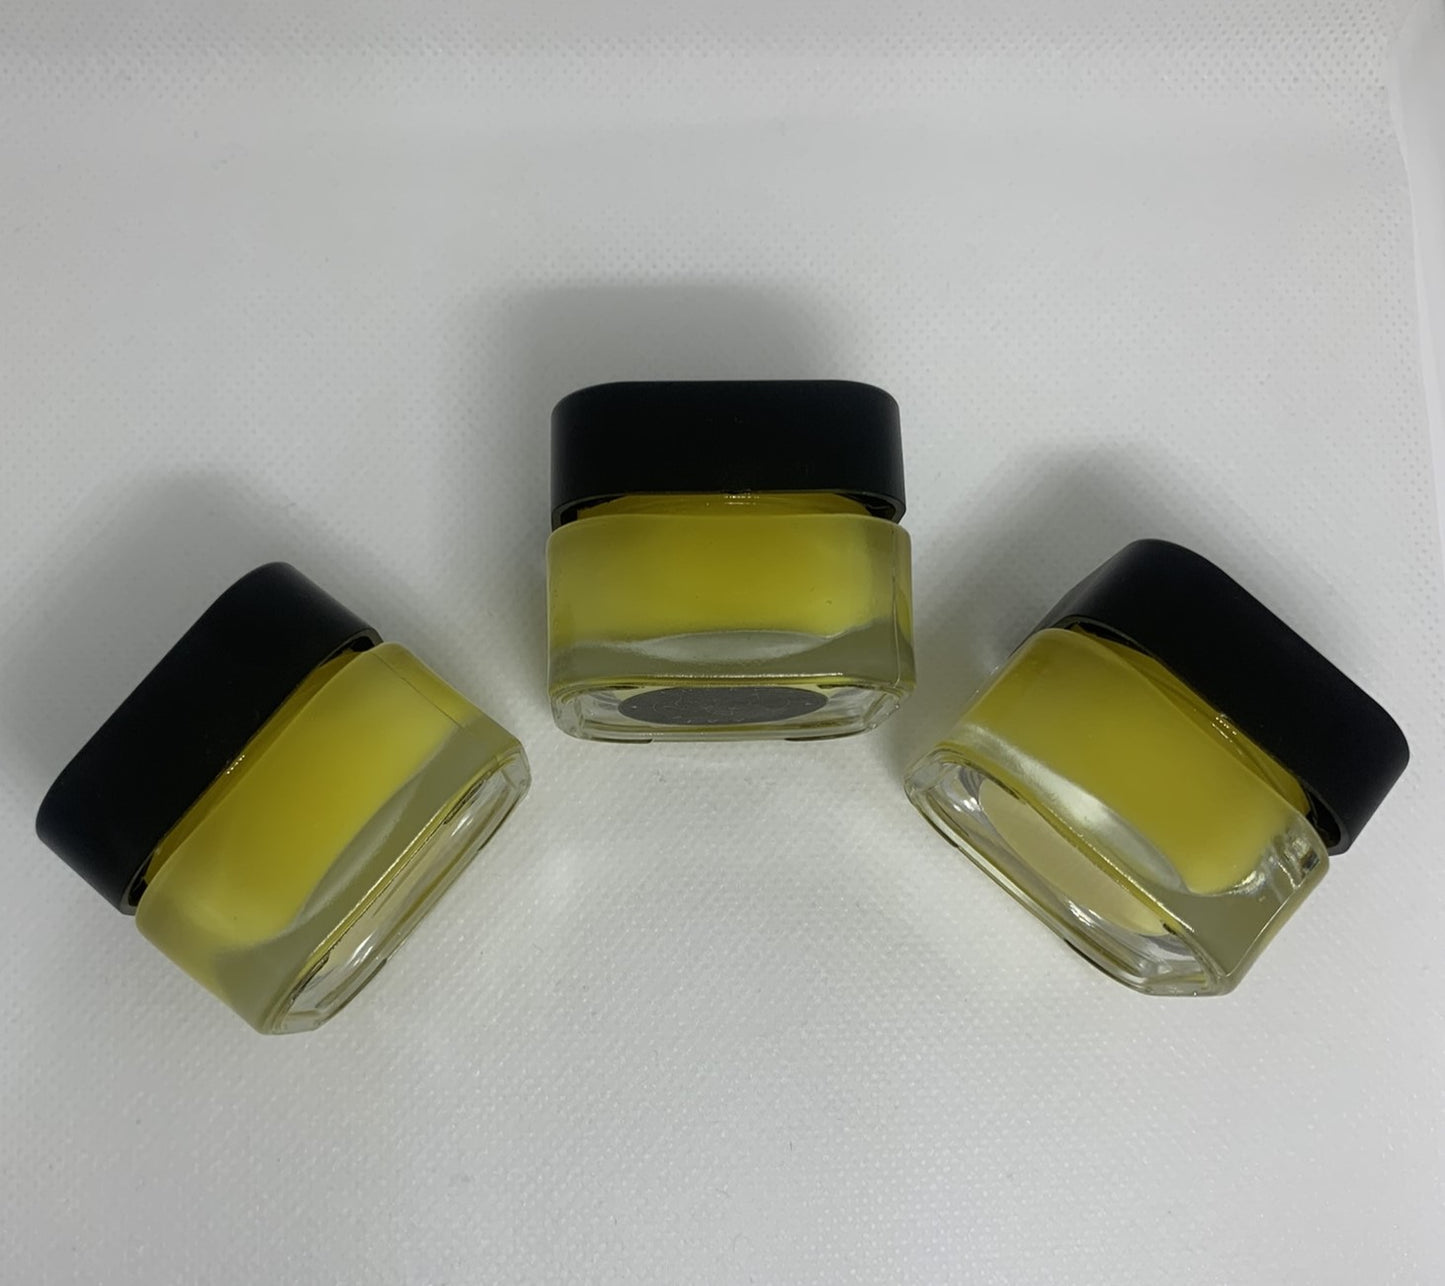 Image of Lucky's Ivy Golden Night Under-Eye Balm. Three closed jars showing the outside of the product, one product having the logo visible.